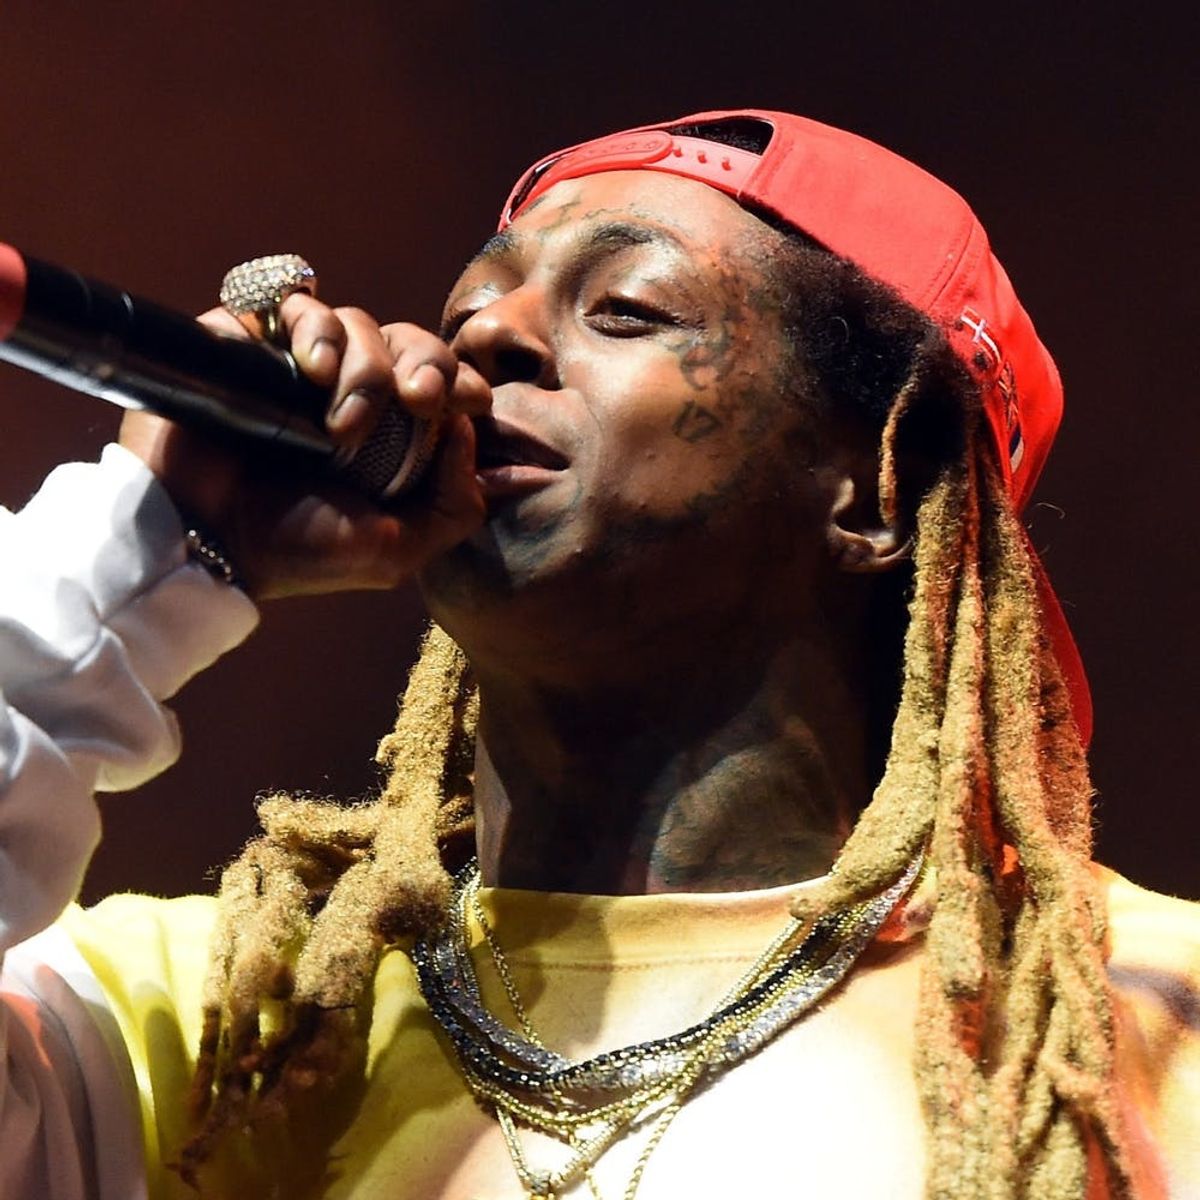 Lil Wayne Is Recovering from a Seriously Scary Seizure Incident